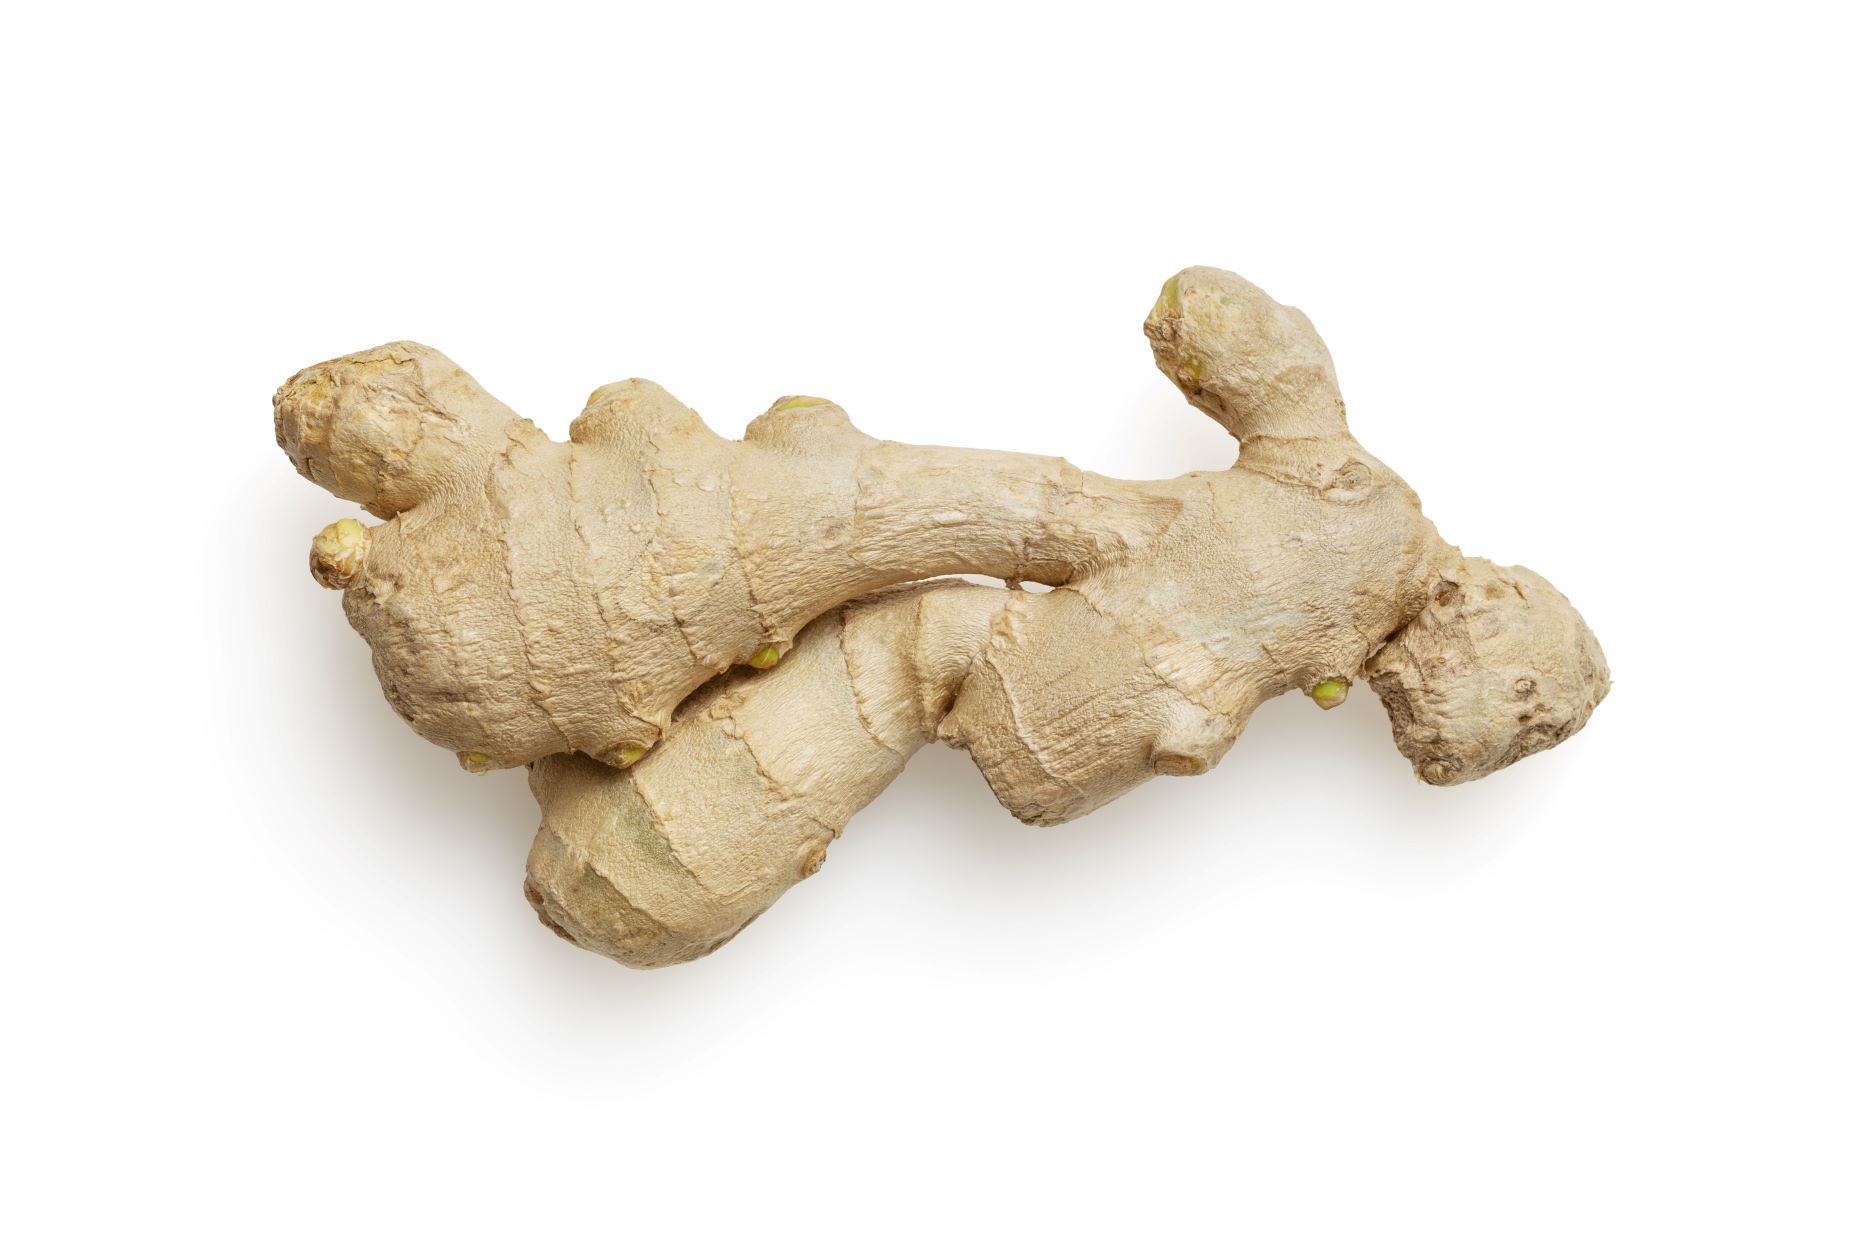 An image of ginger.